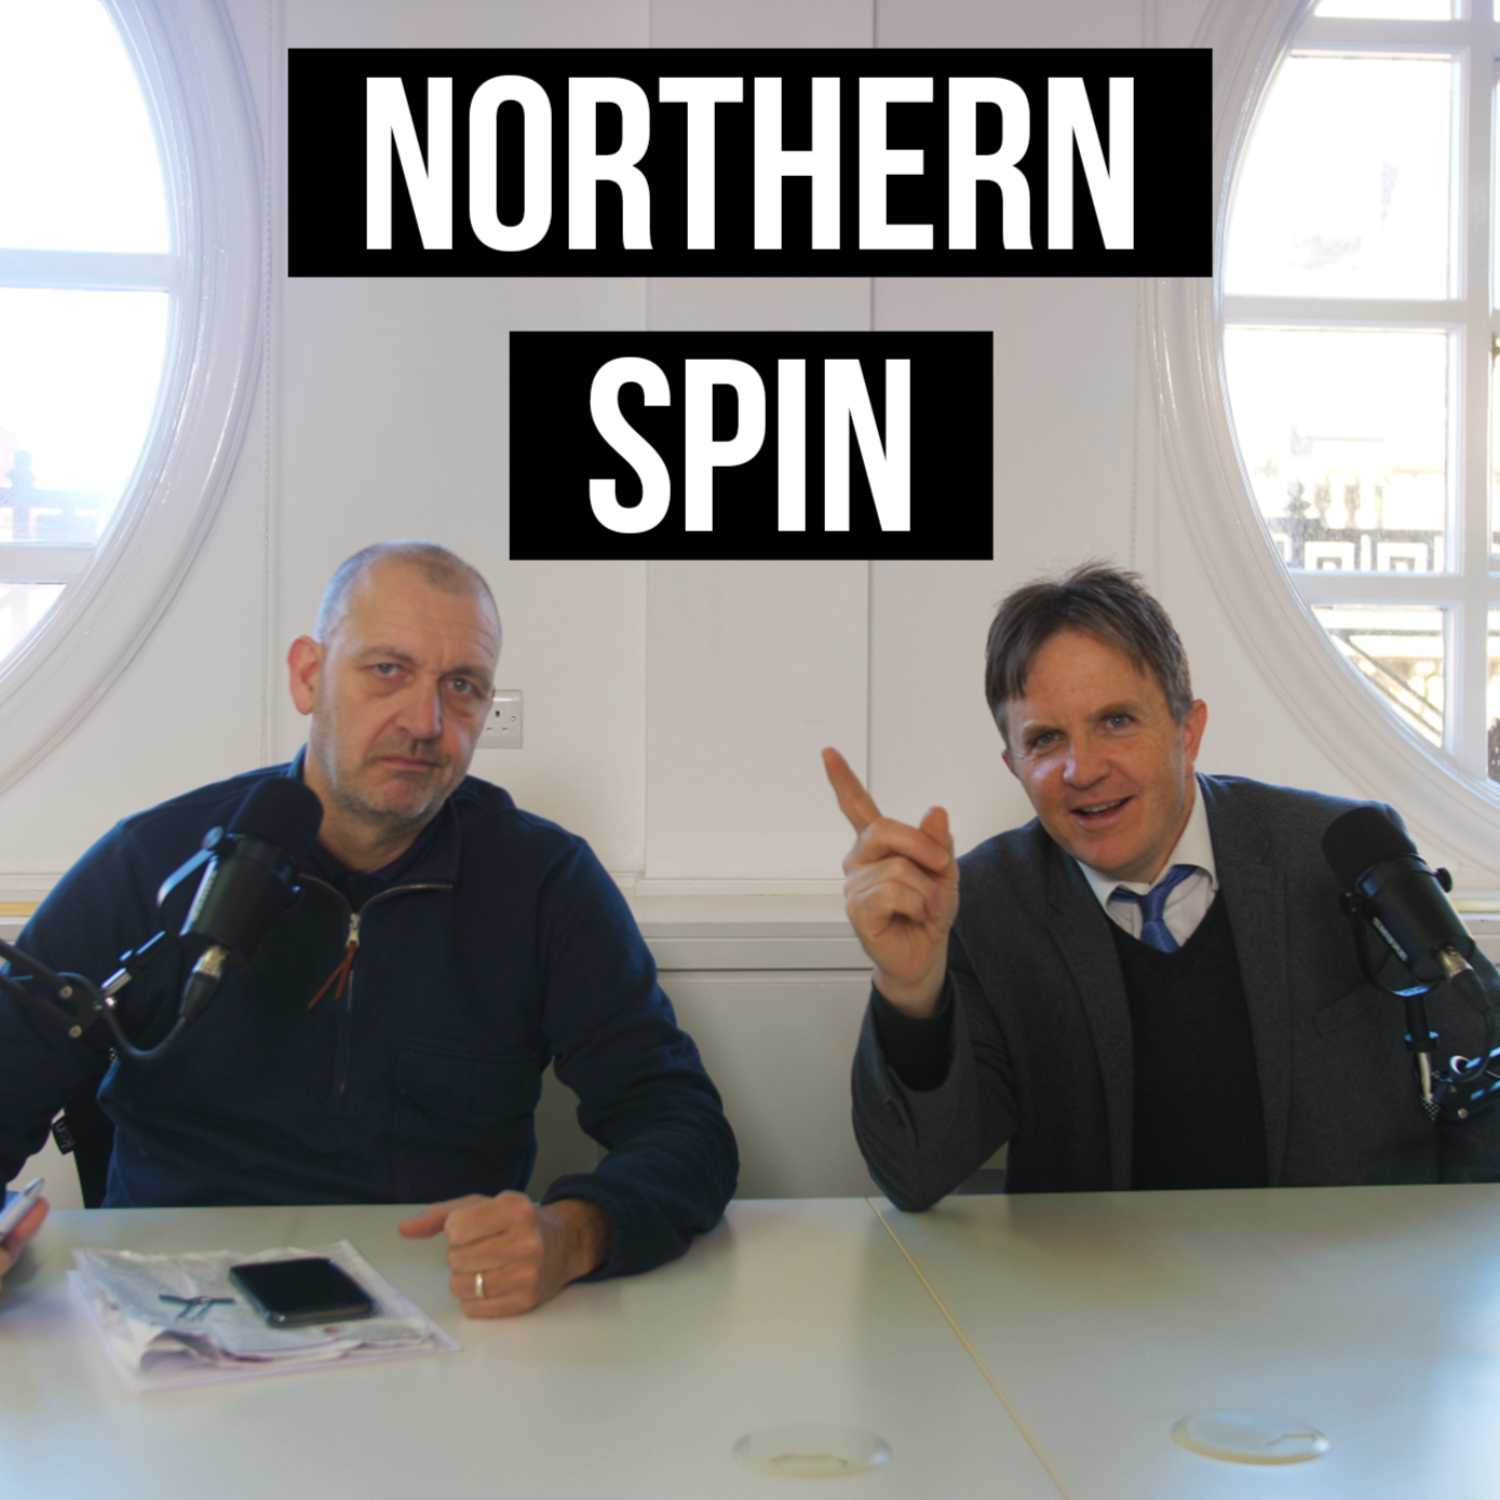 Northern Spin - Season 5 - Episode 6: Labour in Liverpool: Starmer's Sparkles and Mandy's Moves